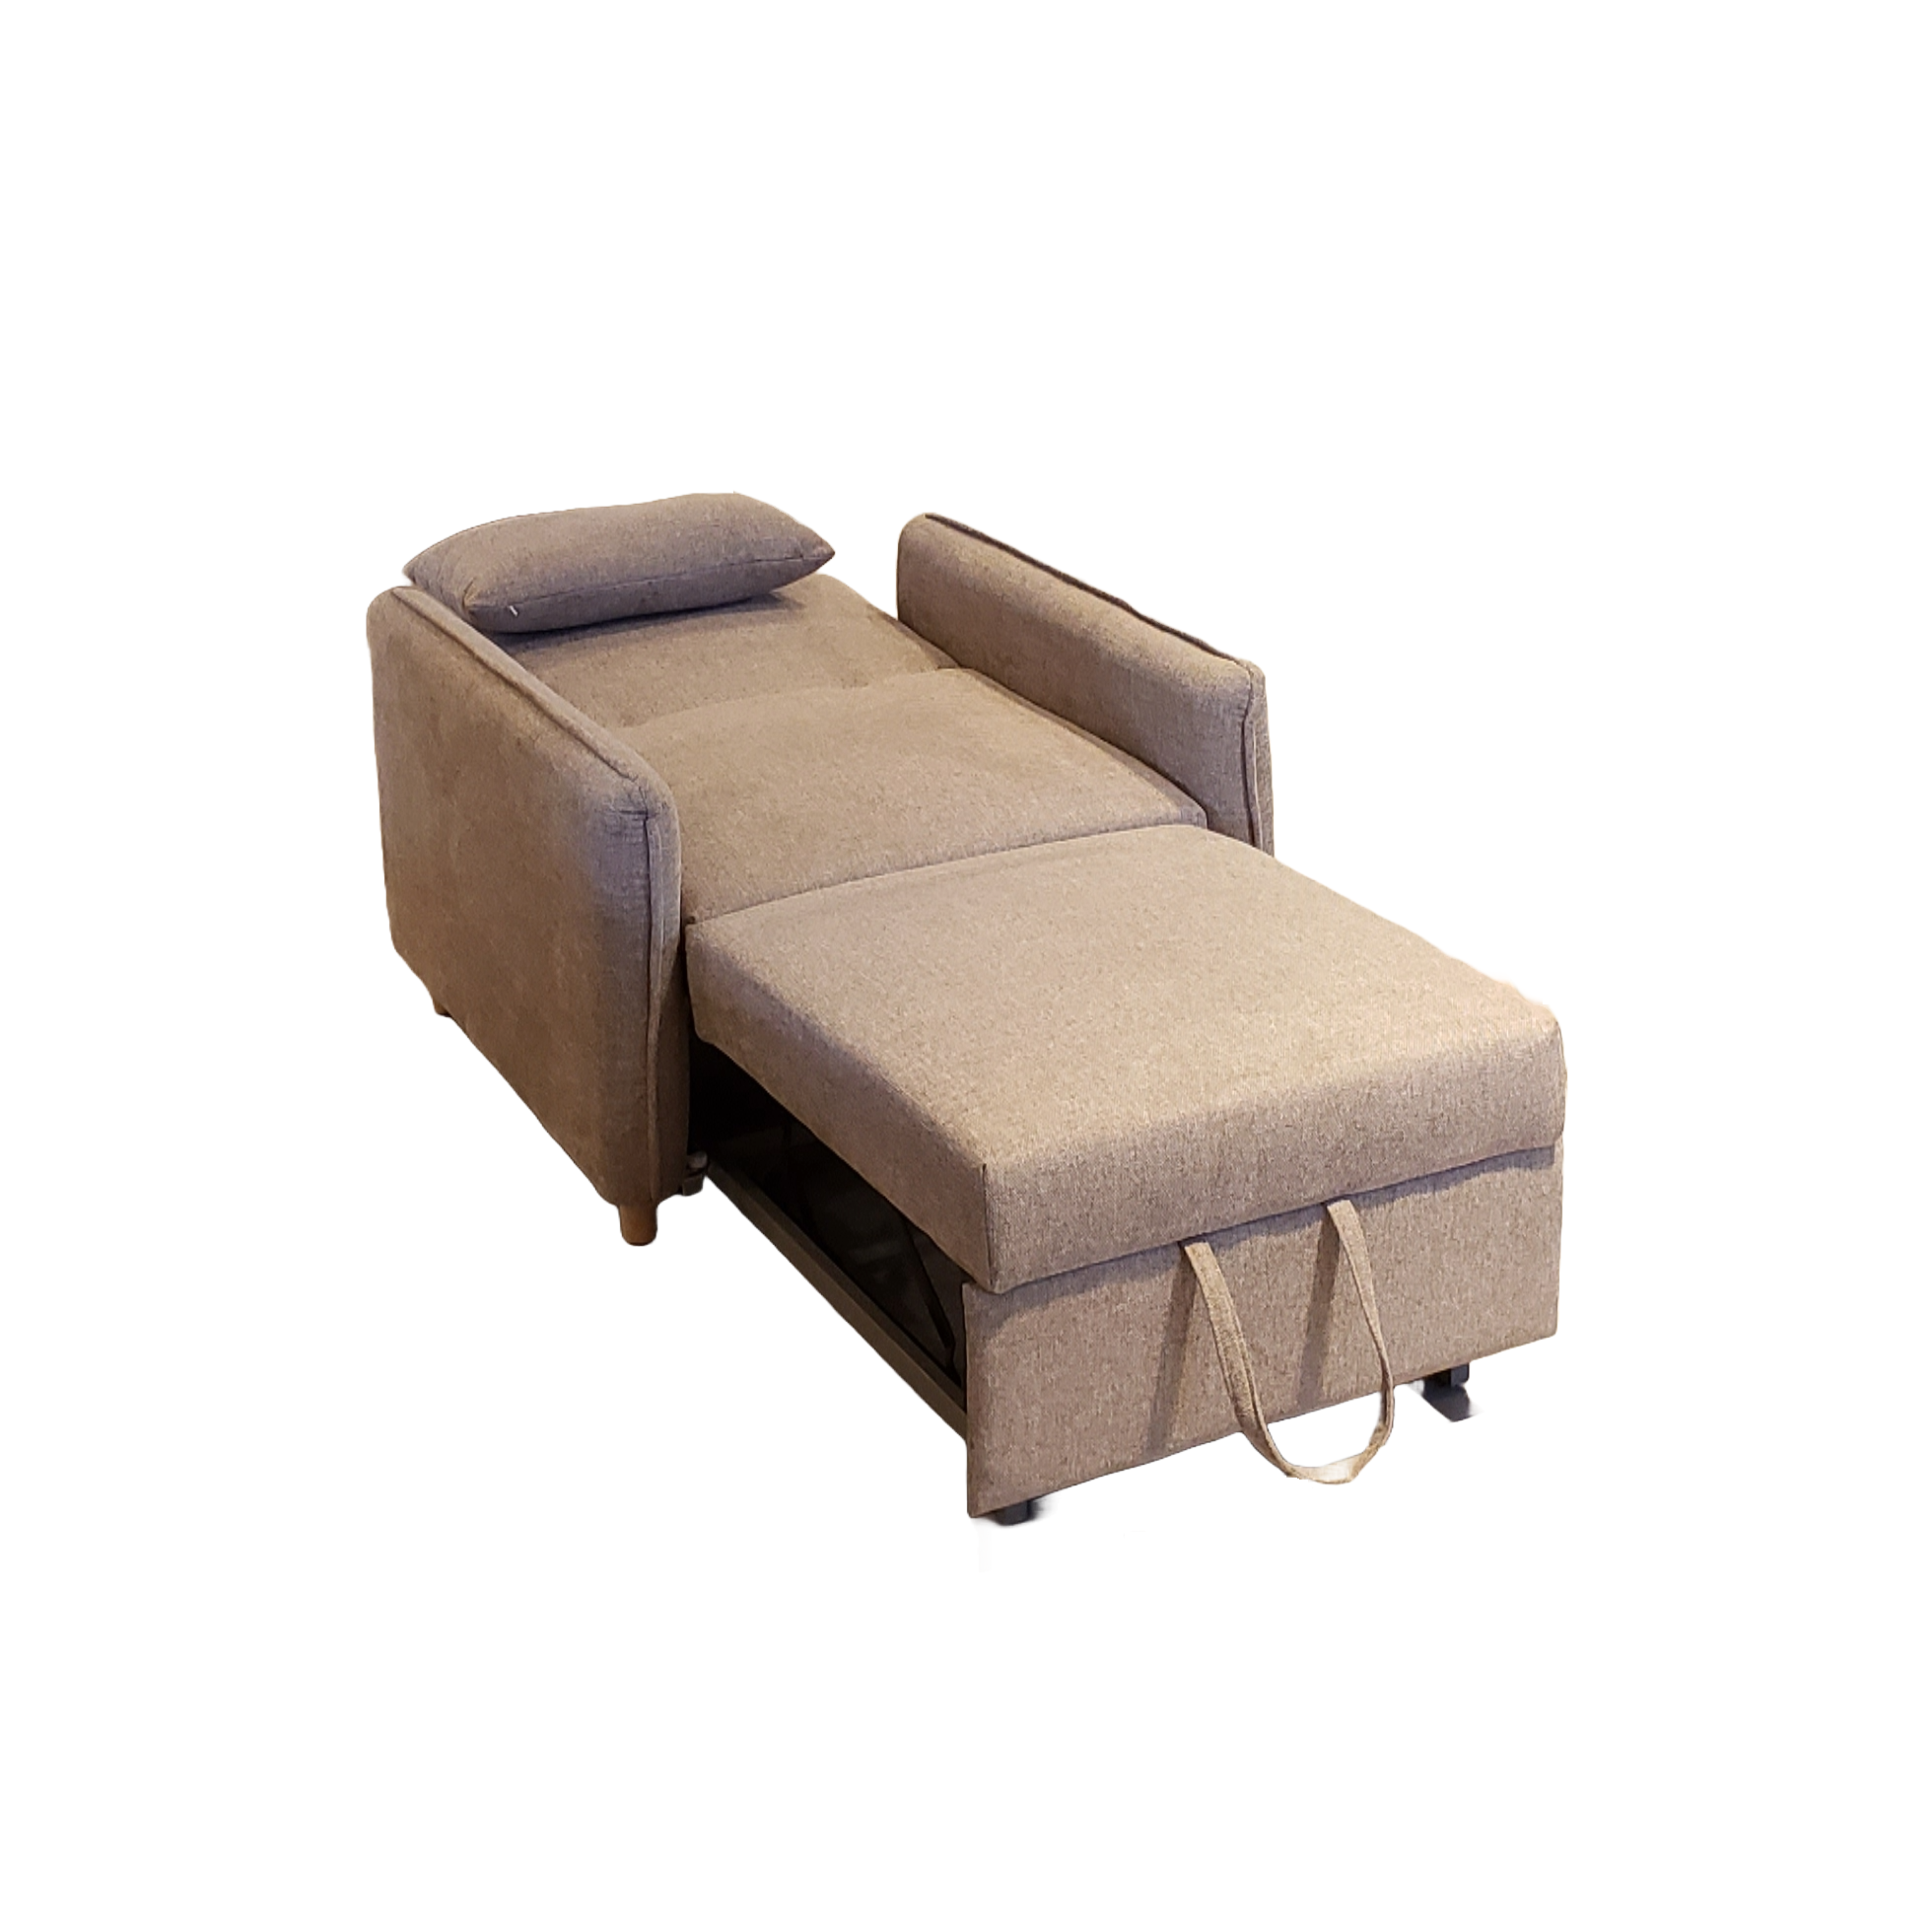 SF3383B 1 Seater Sofa Bed Cream (6).png